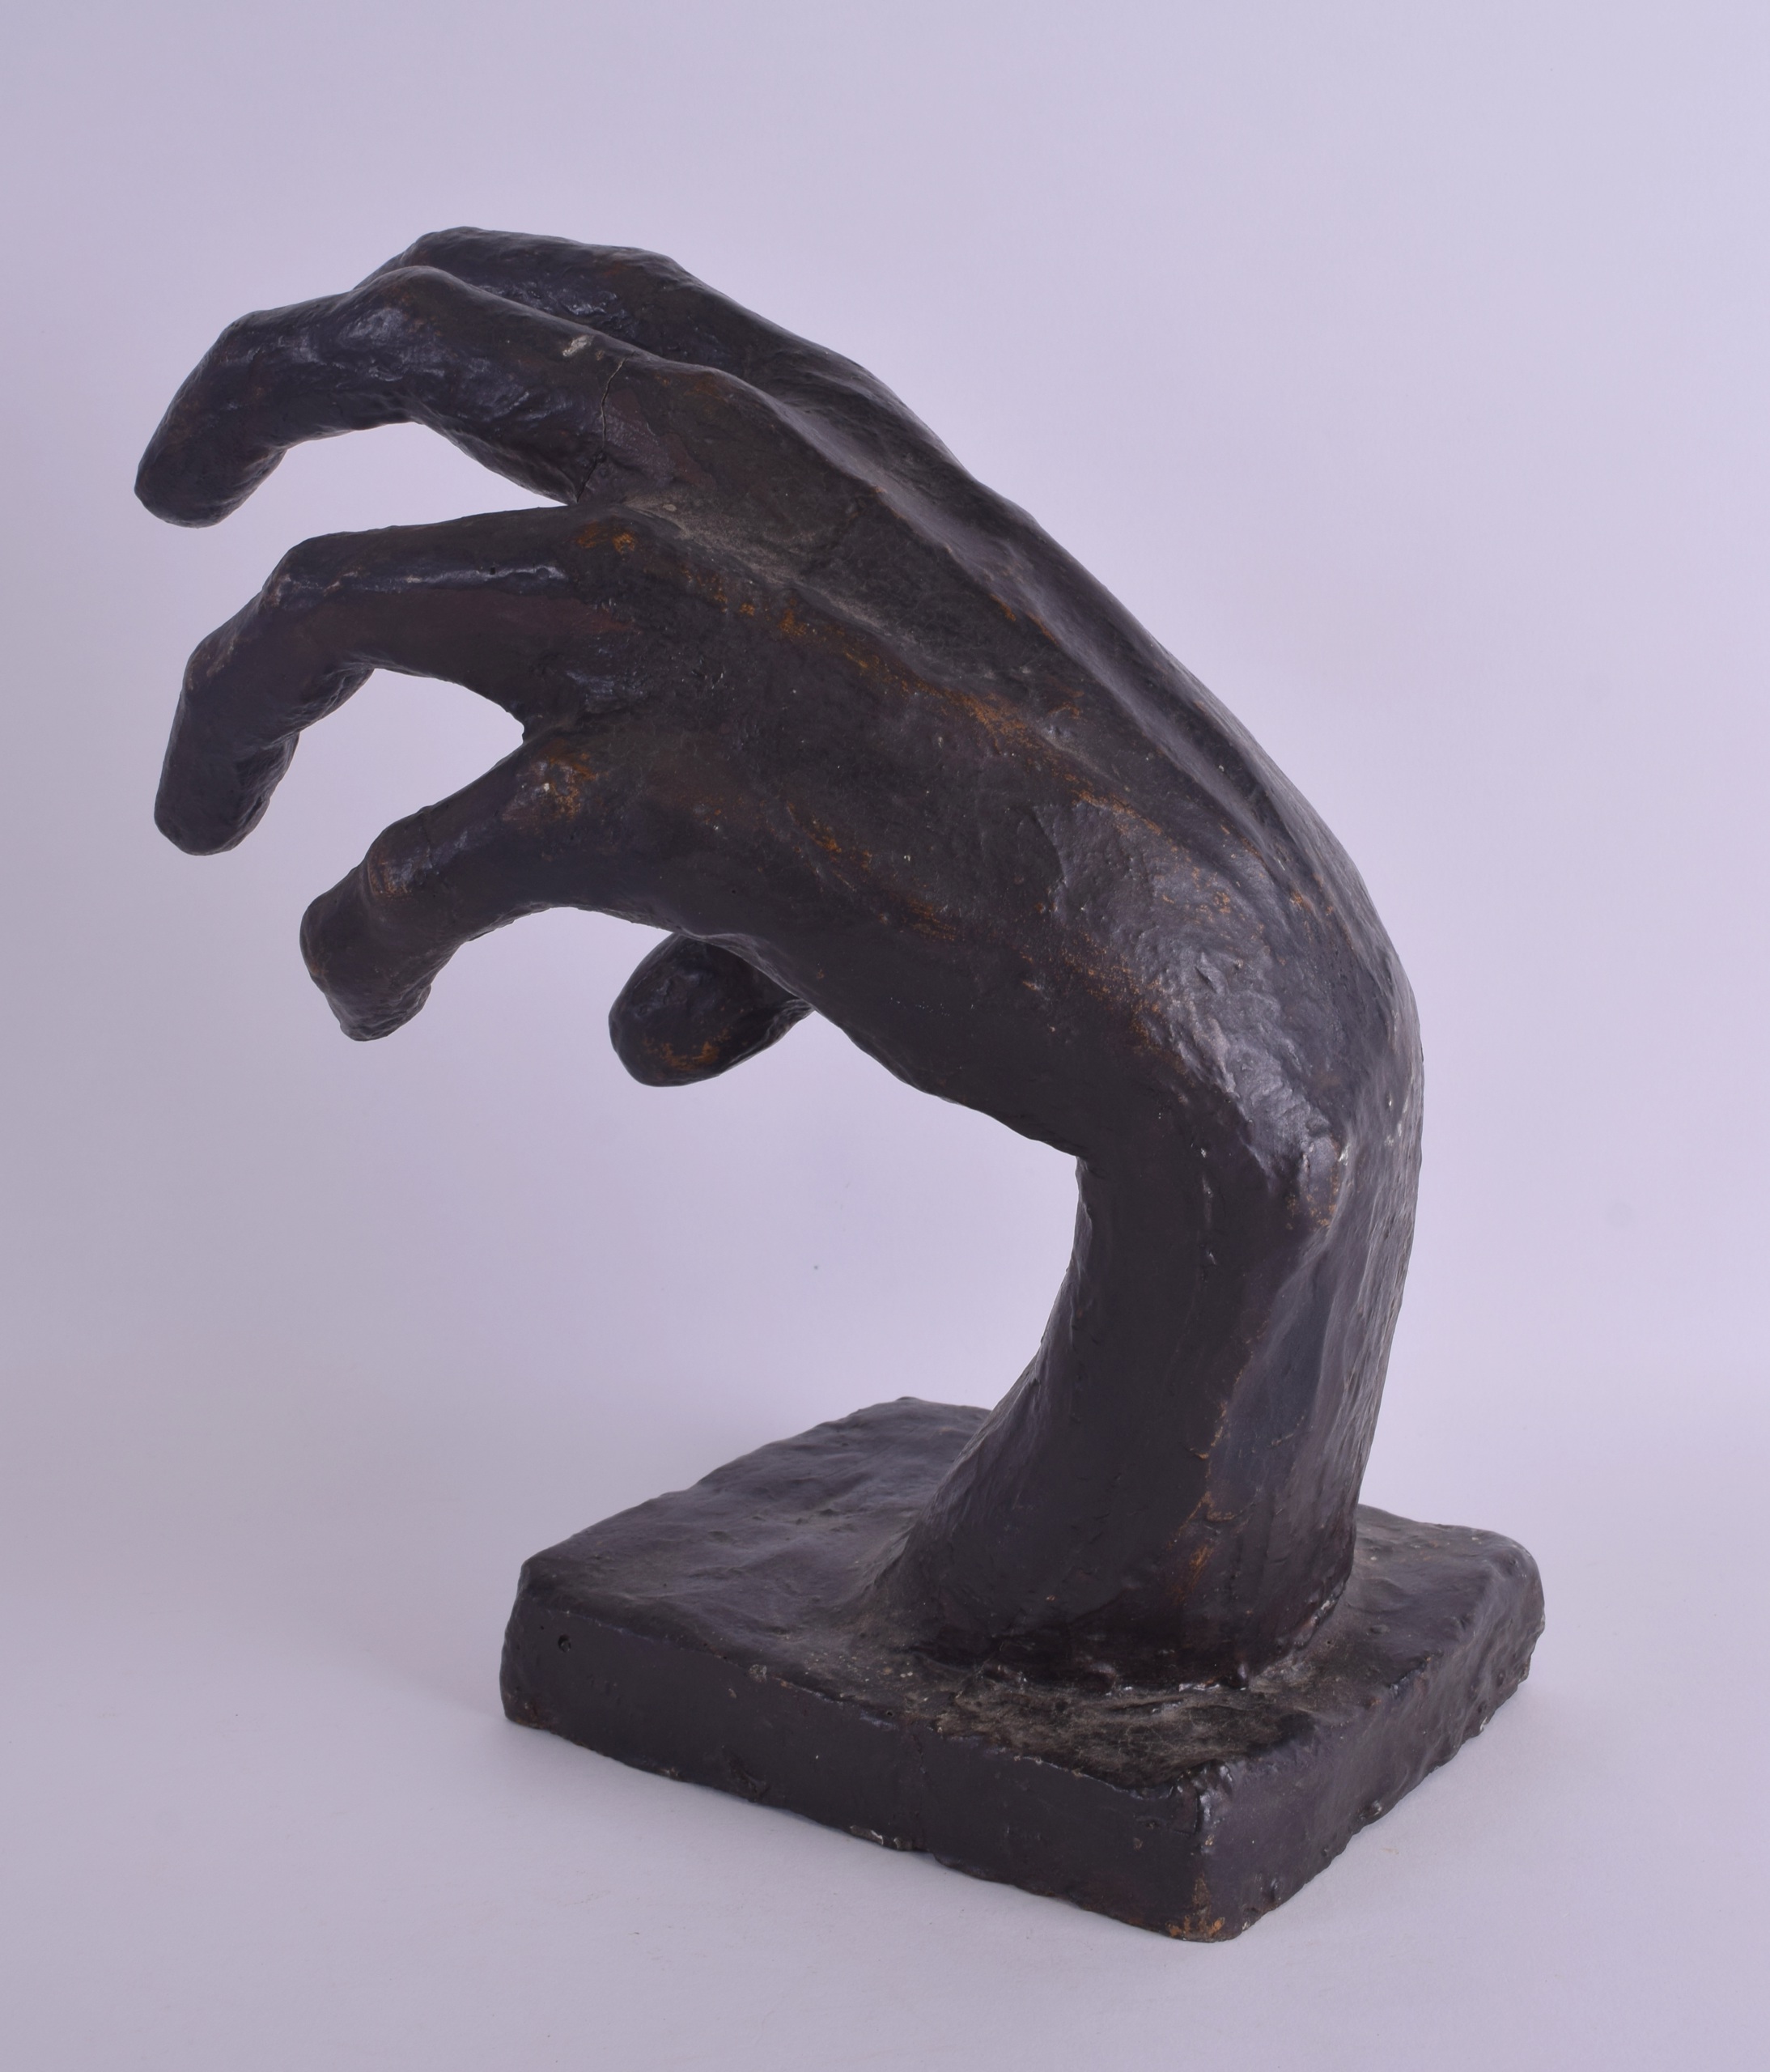 A LATE VICTORIAN BRONZED PLASTER FIGURE OF HAND by Maude M Ackery, teacher of drawing and design - Image 2 of 5